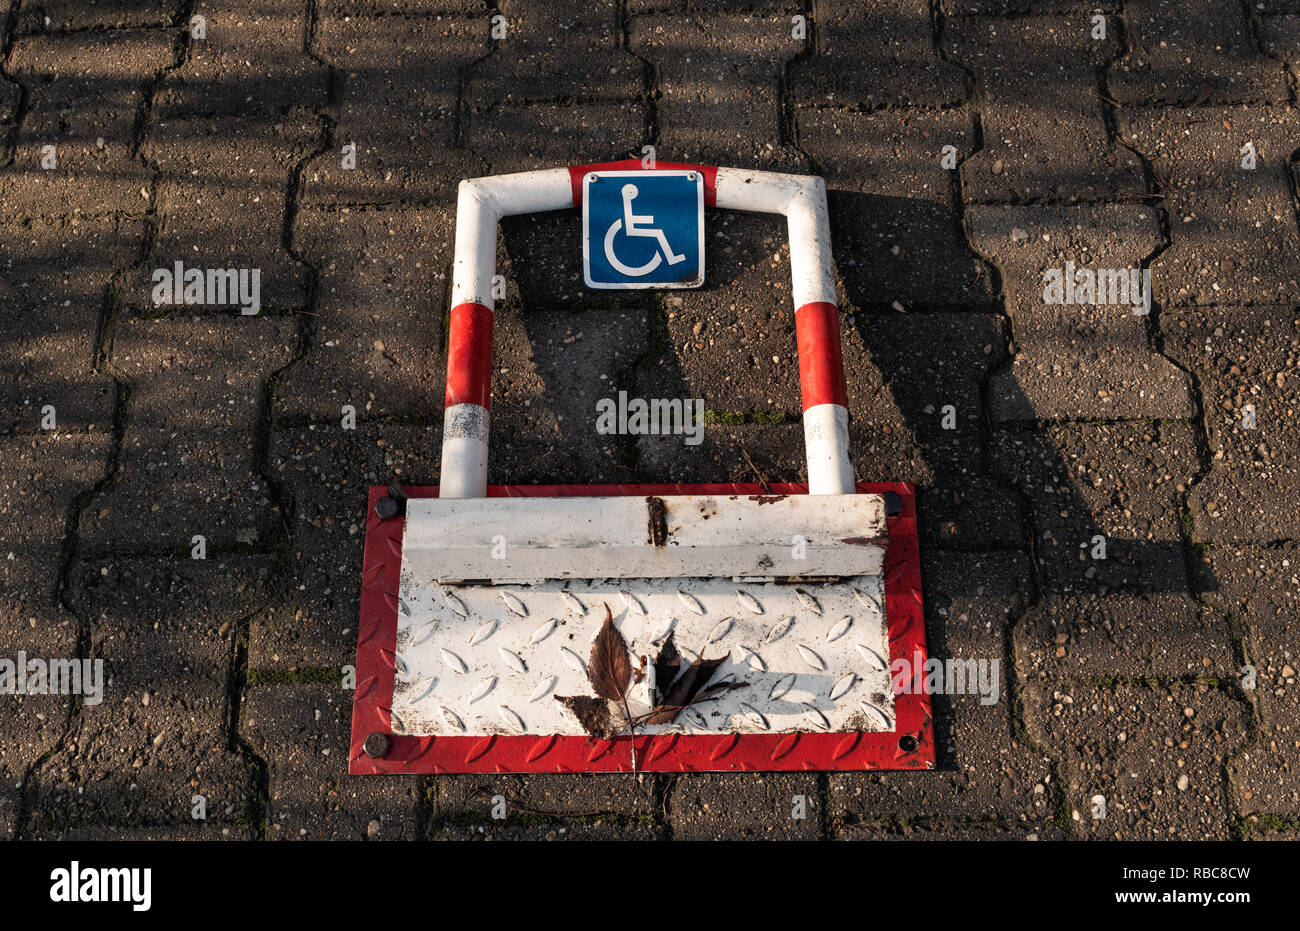 Disabled person parking space protector close up Stock Photo